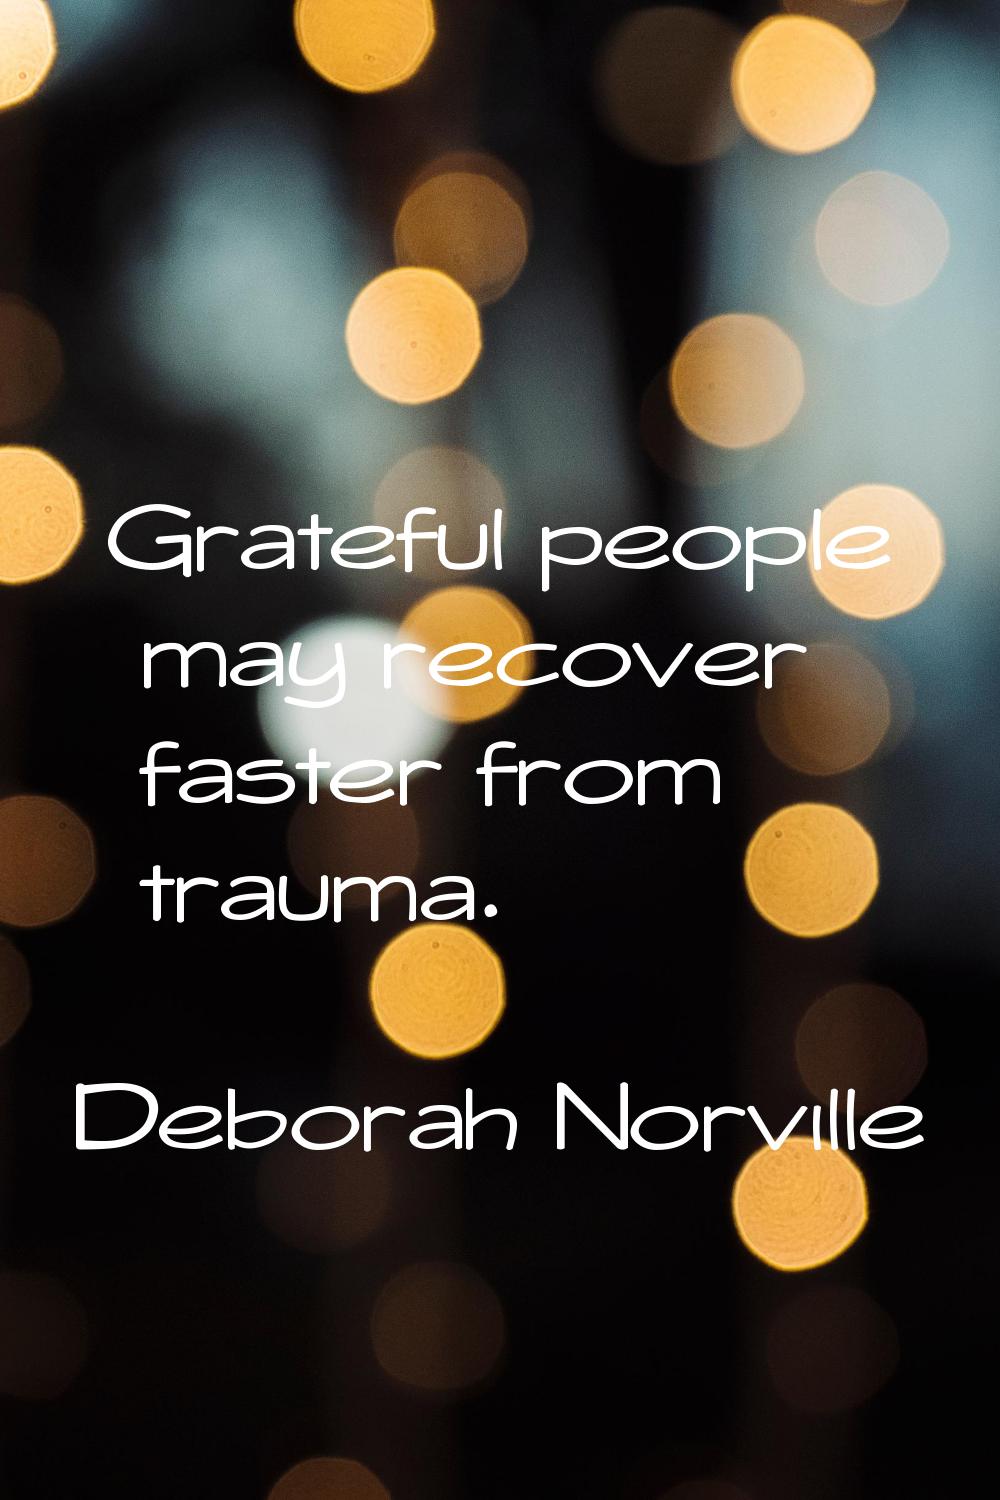 Grateful people may recover faster from trauma.